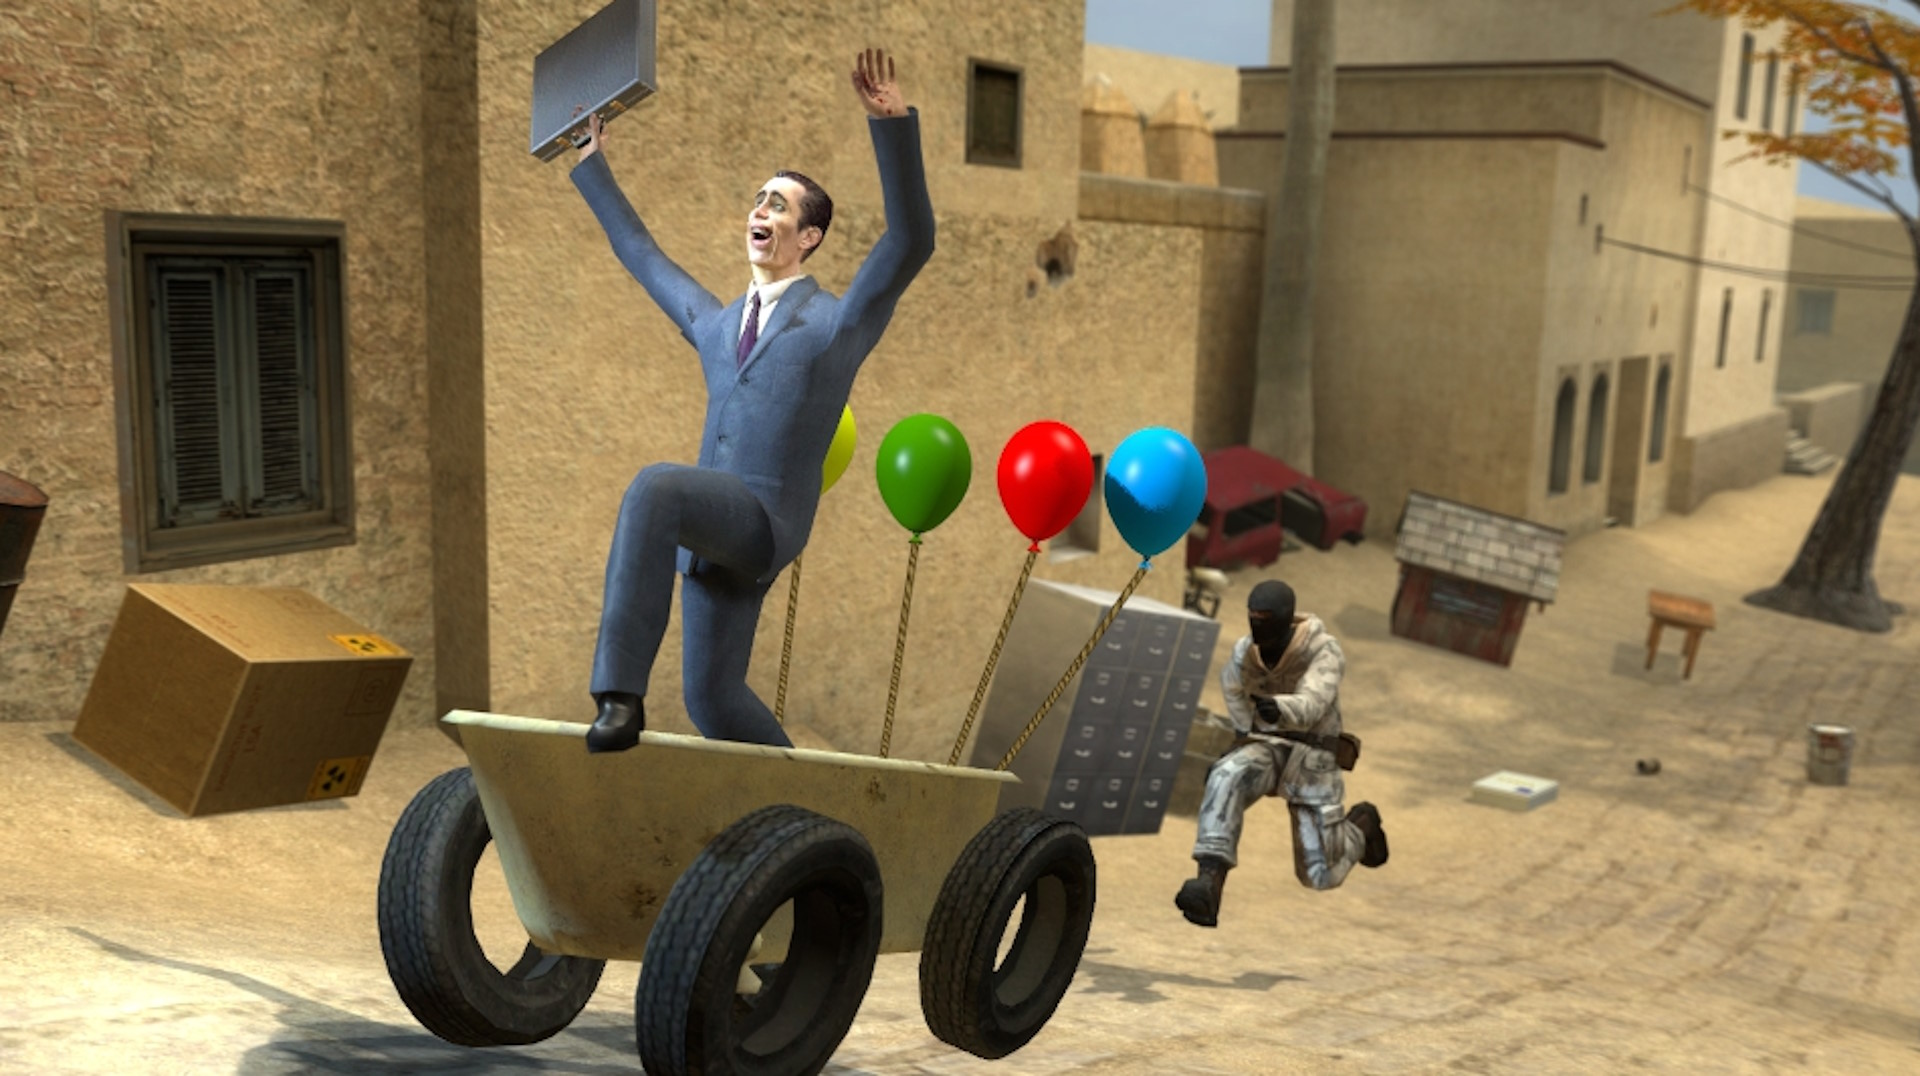  Garry's Mod is removing 20 years' worth of Nintendo-related items from its Steam Workshop following takedown request: 'It's Nintendo. Need more be said?' 